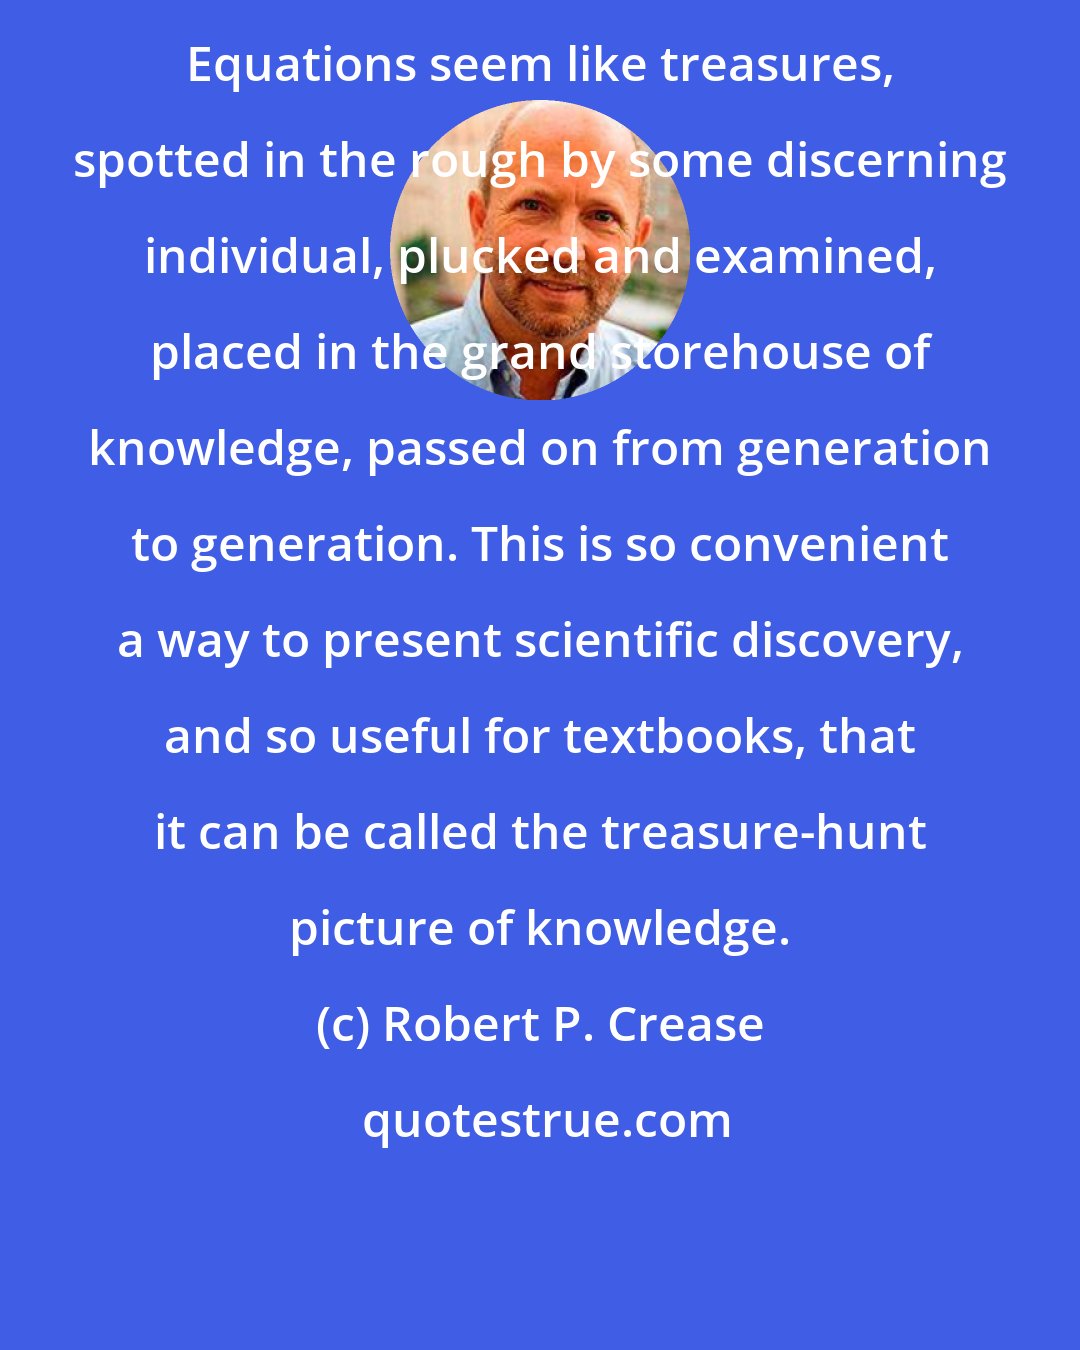 Robert P. Crease: Equations seem like treasures, spotted in the rough by some discerning individual, plucked and examined, placed in the grand storehouse of knowledge, passed on from generation to generation. This is so convenient a way to present scientific discovery, and so useful for textbooks, that it can be called the treasure-hunt picture of knowledge.